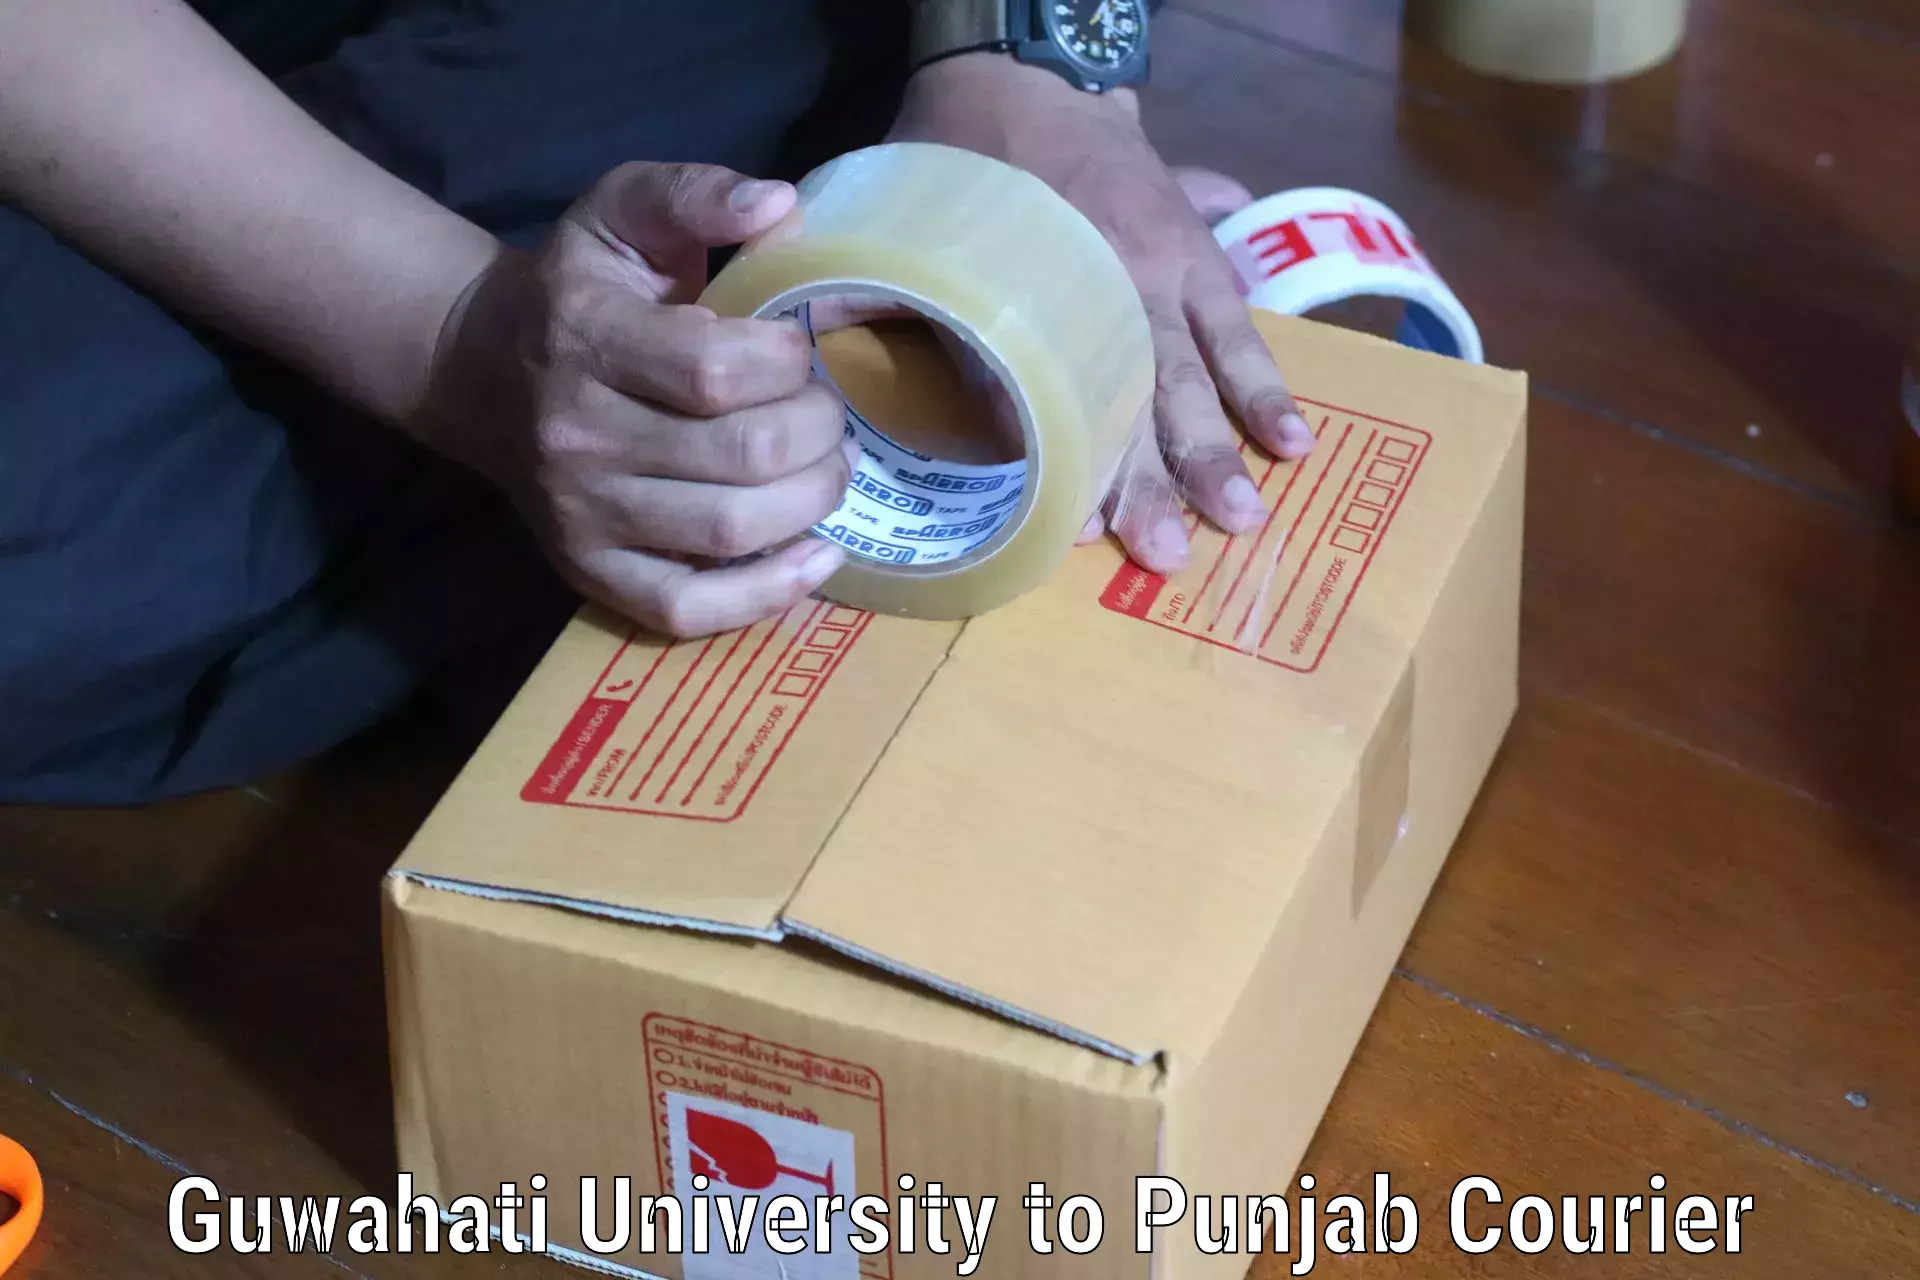 Nationwide shipping coverage Guwahati University to Sultanpur Lodhi